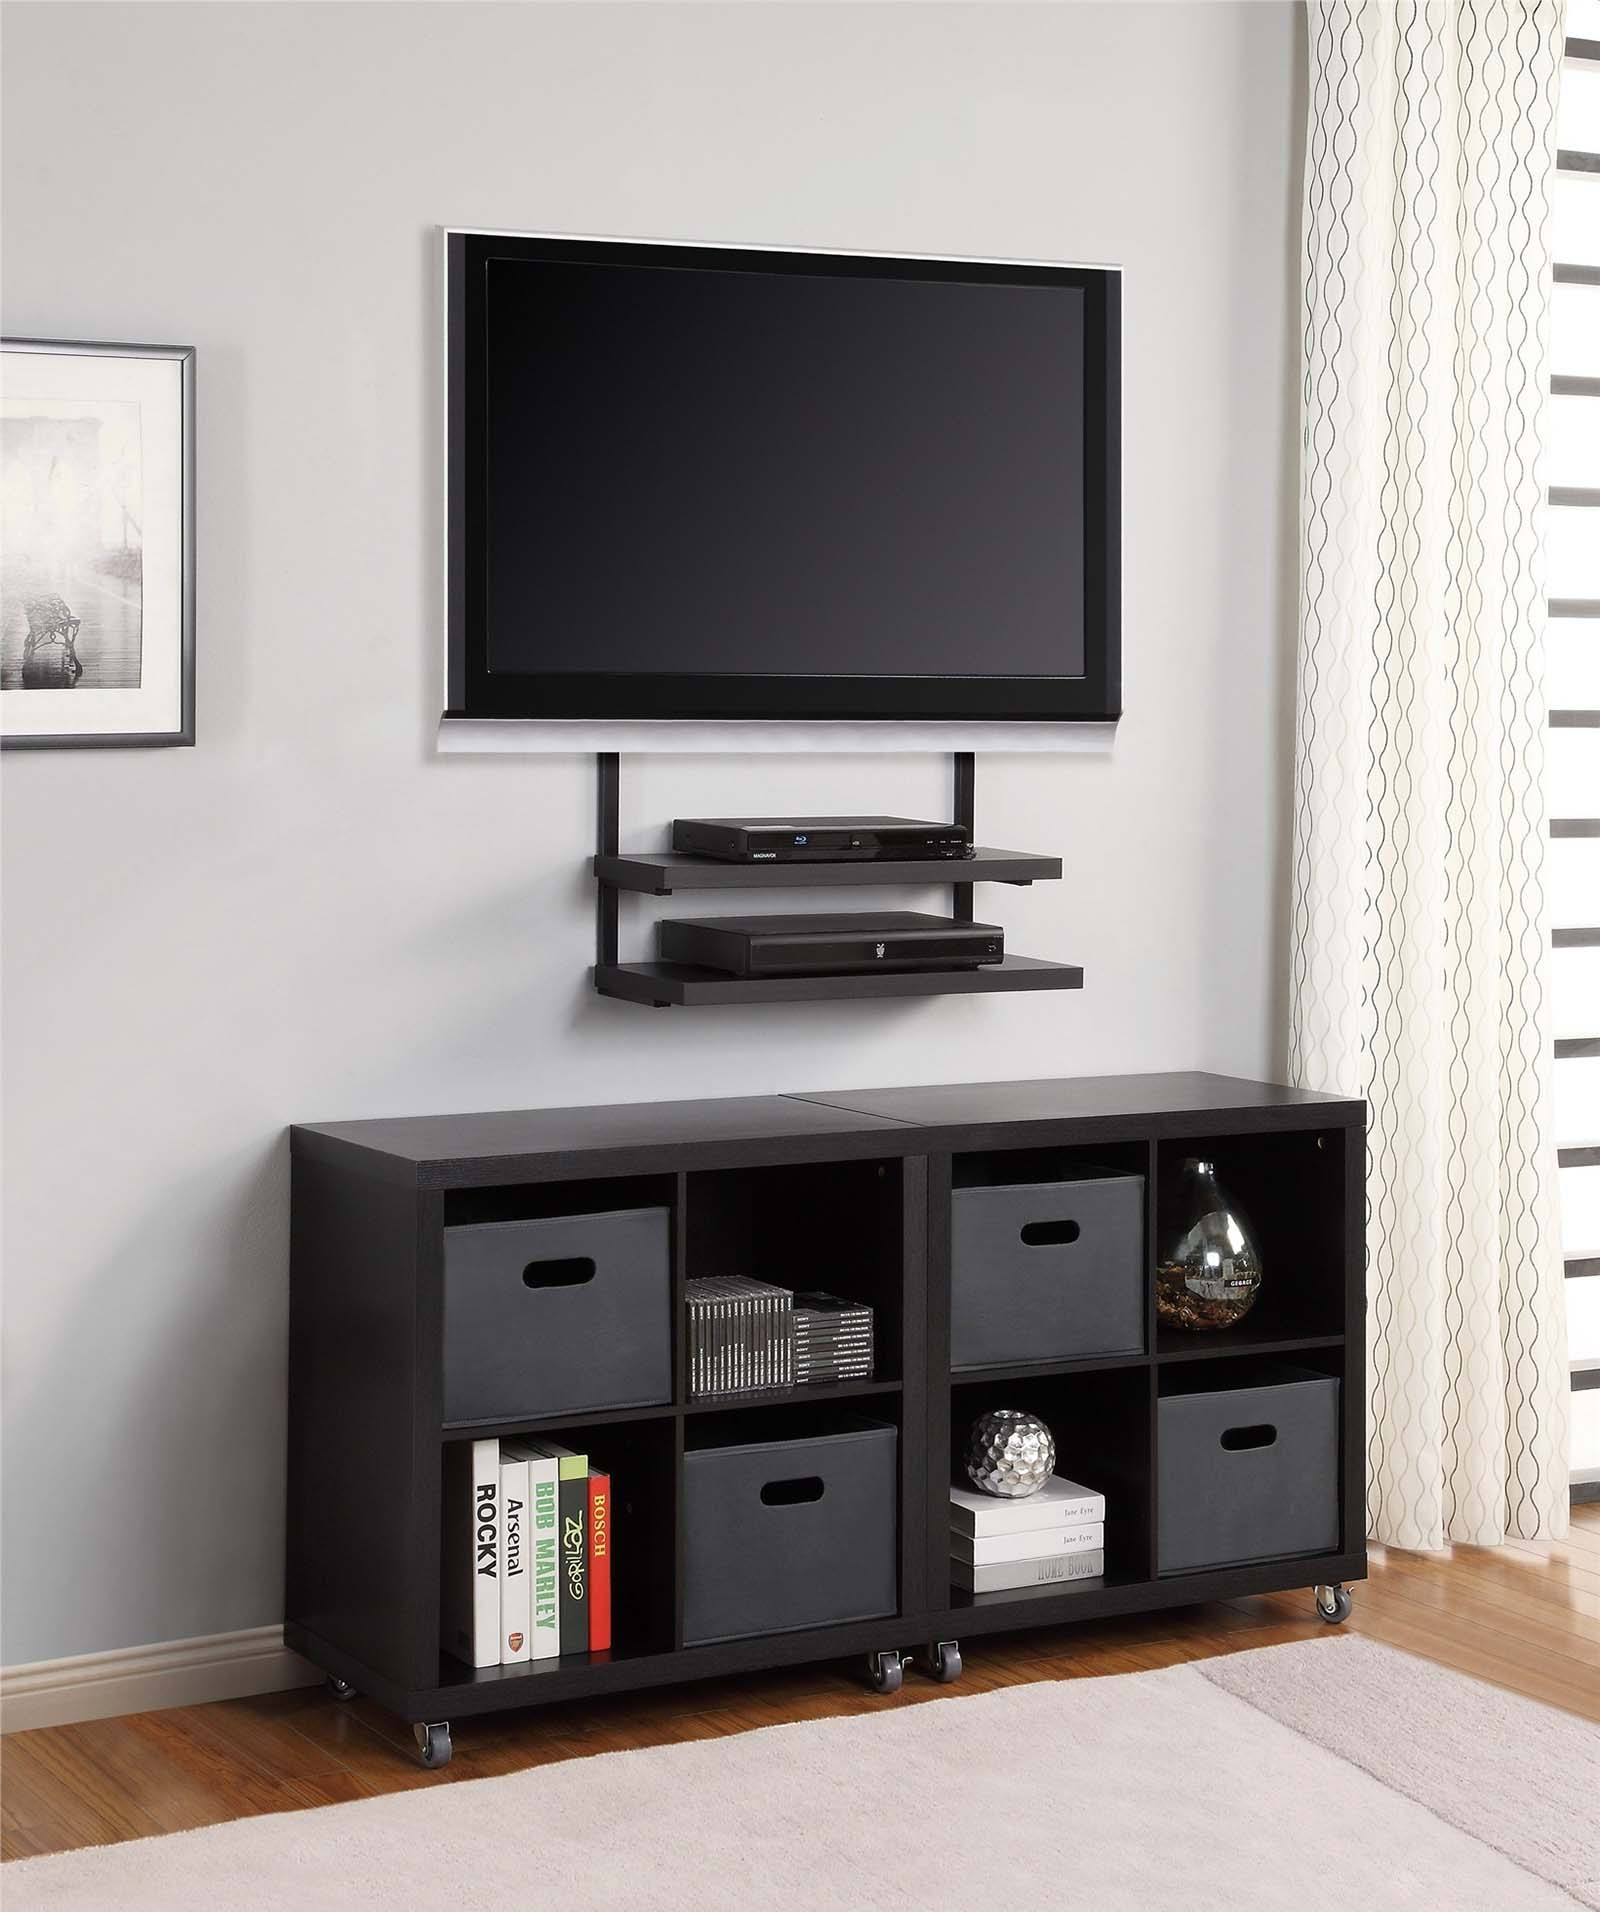 Bedroom Tv Wall Mount
 14 Modern TV Wall Mount Ideas For Your Best Room